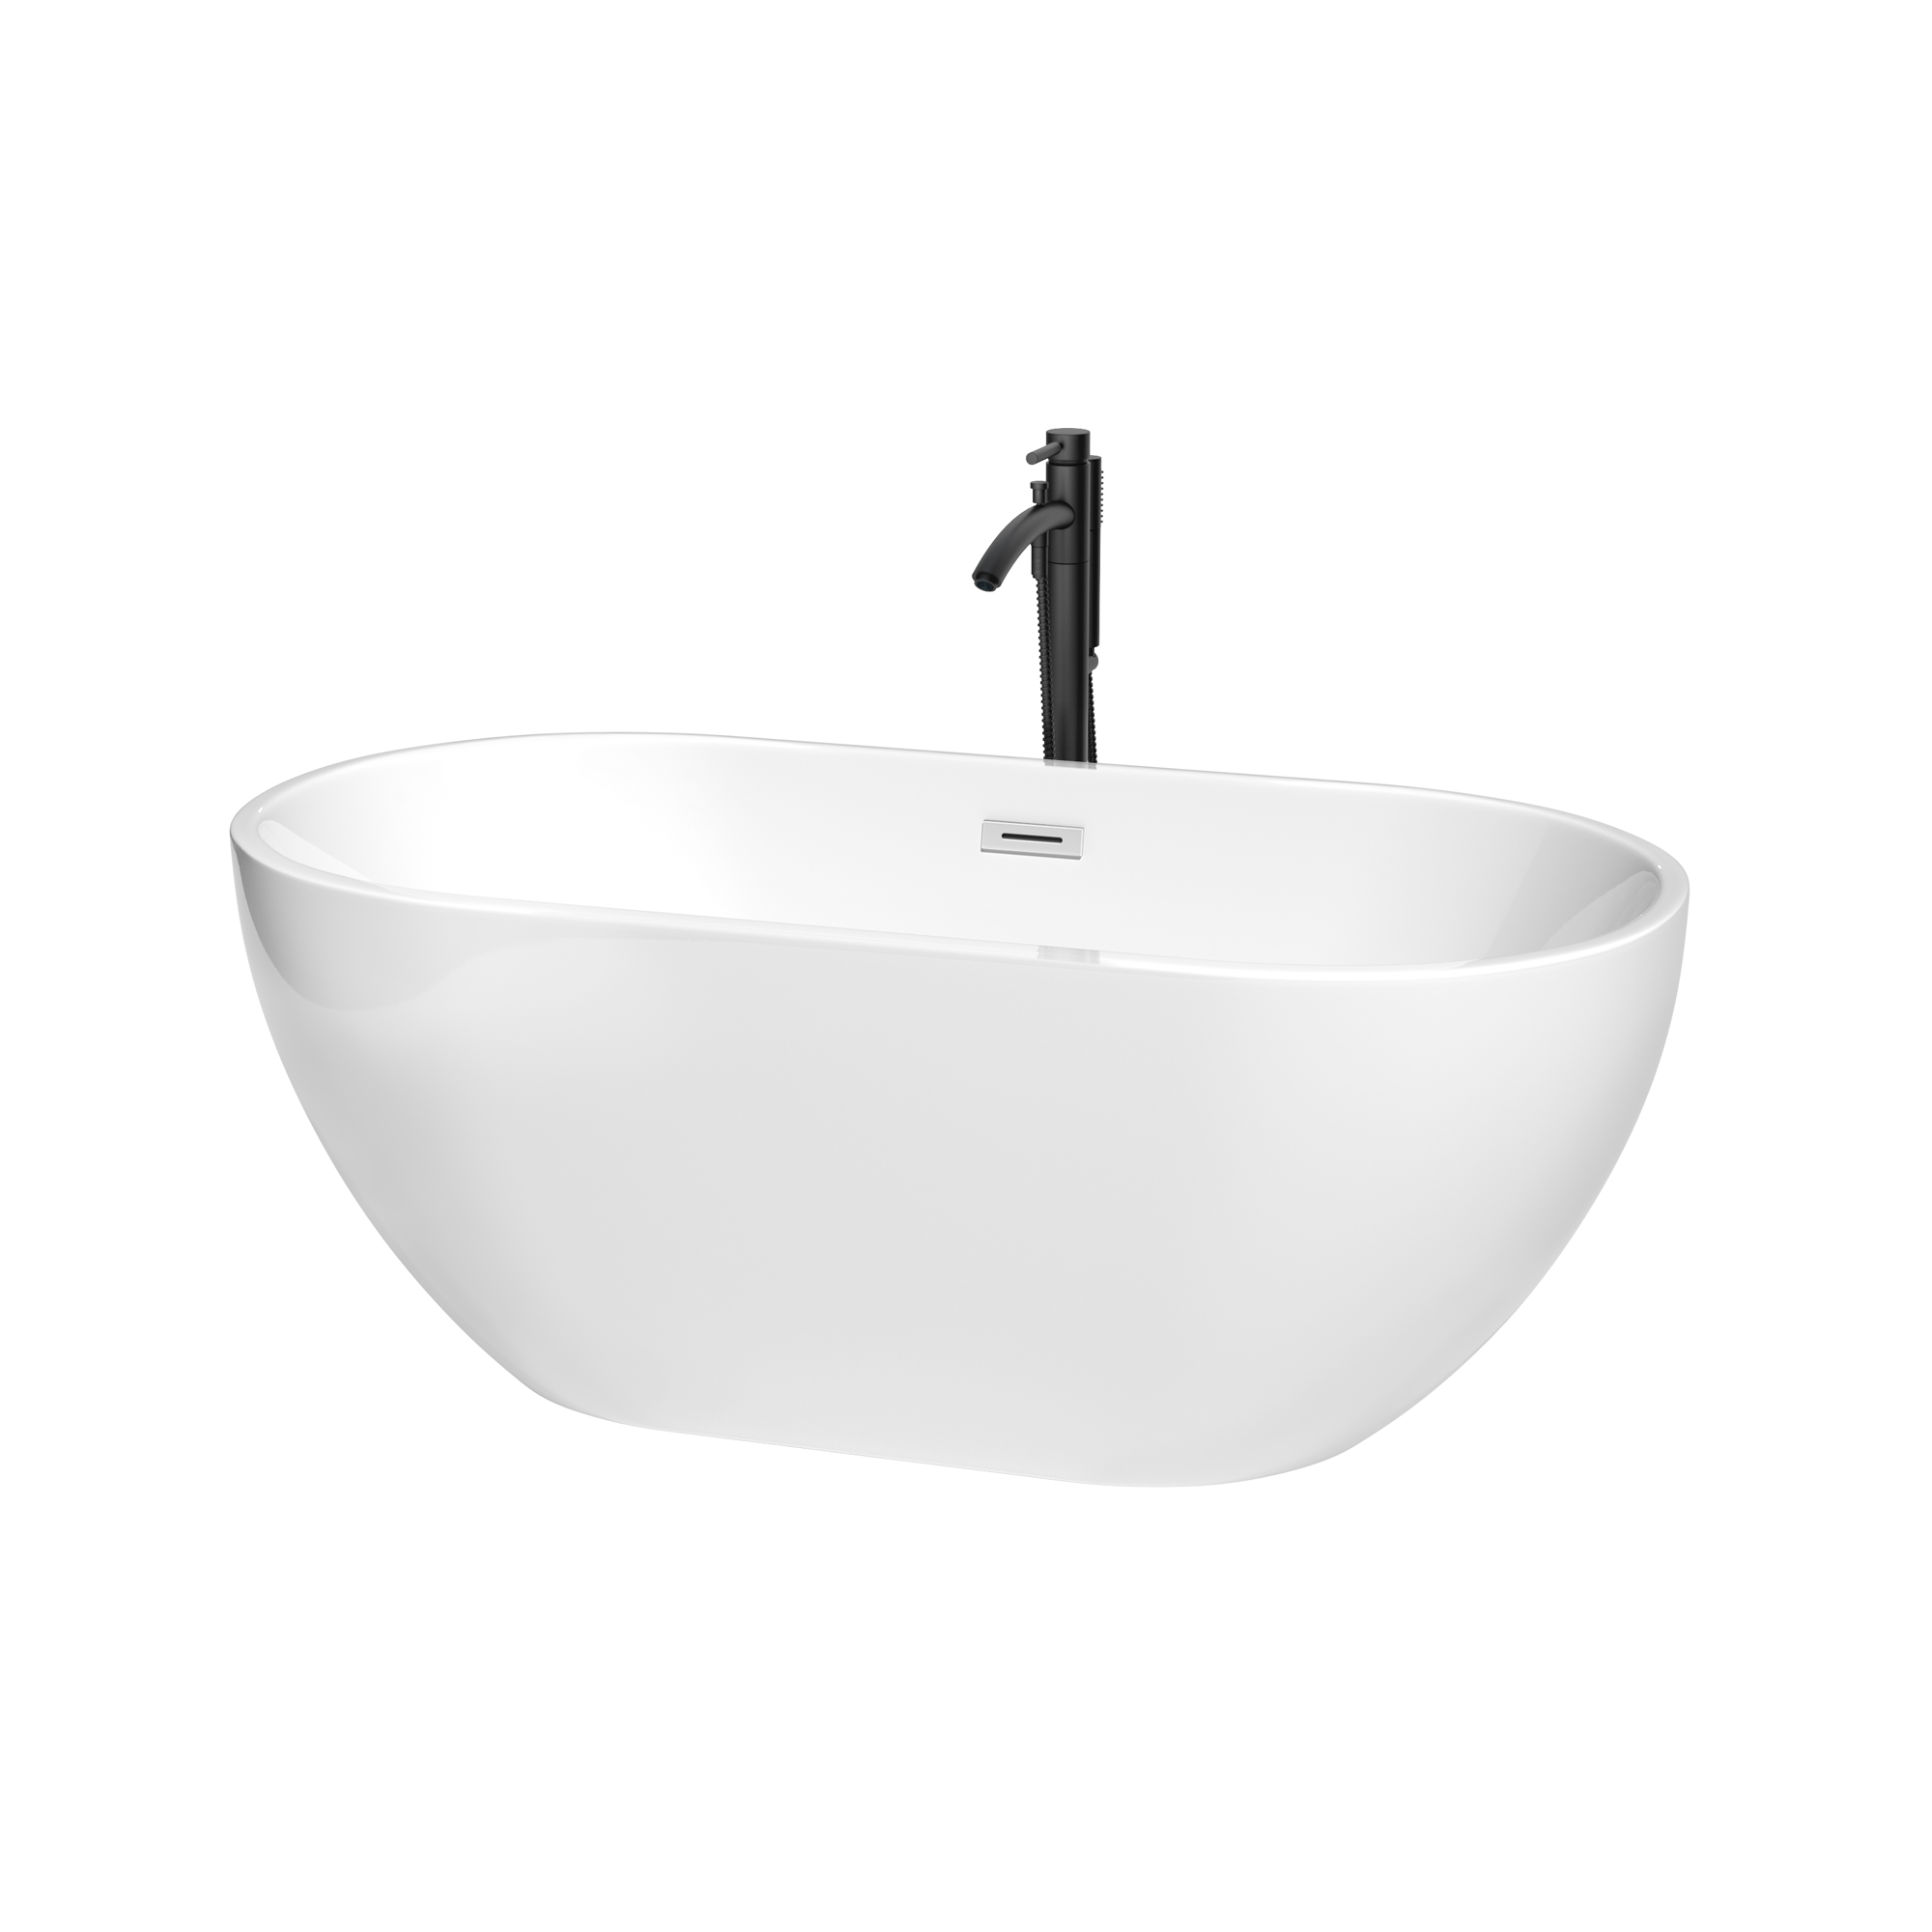 60" Freestanding Bathtub in White Finish with Floor Mounted Faucet in Matte Black and Polished Chrome Trim